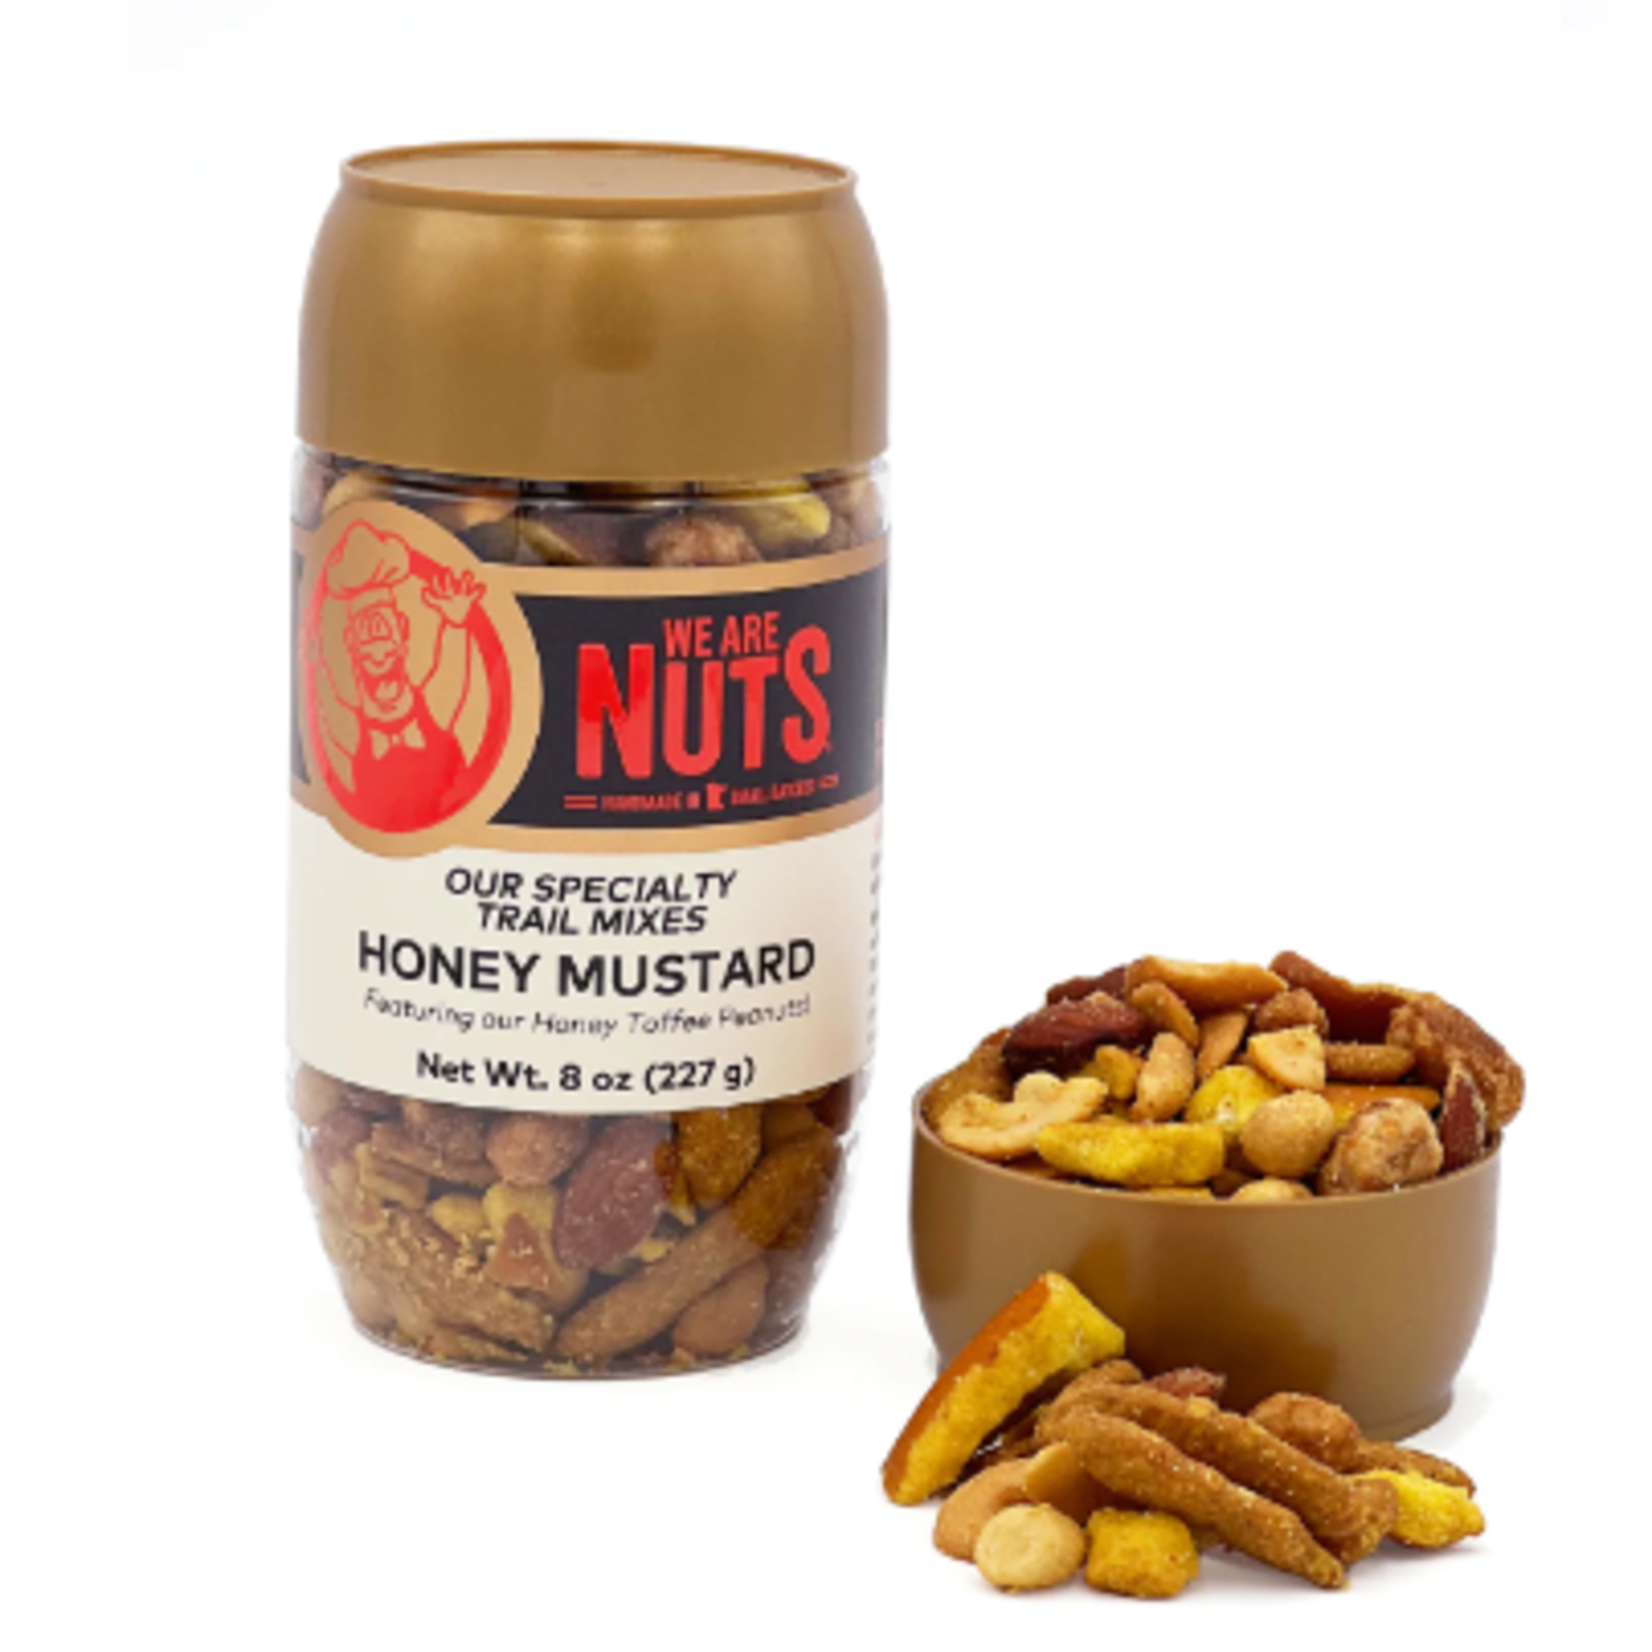 We Are Nuts We Are Nuts - Honey Mustard Snack Mix, 8 Oz